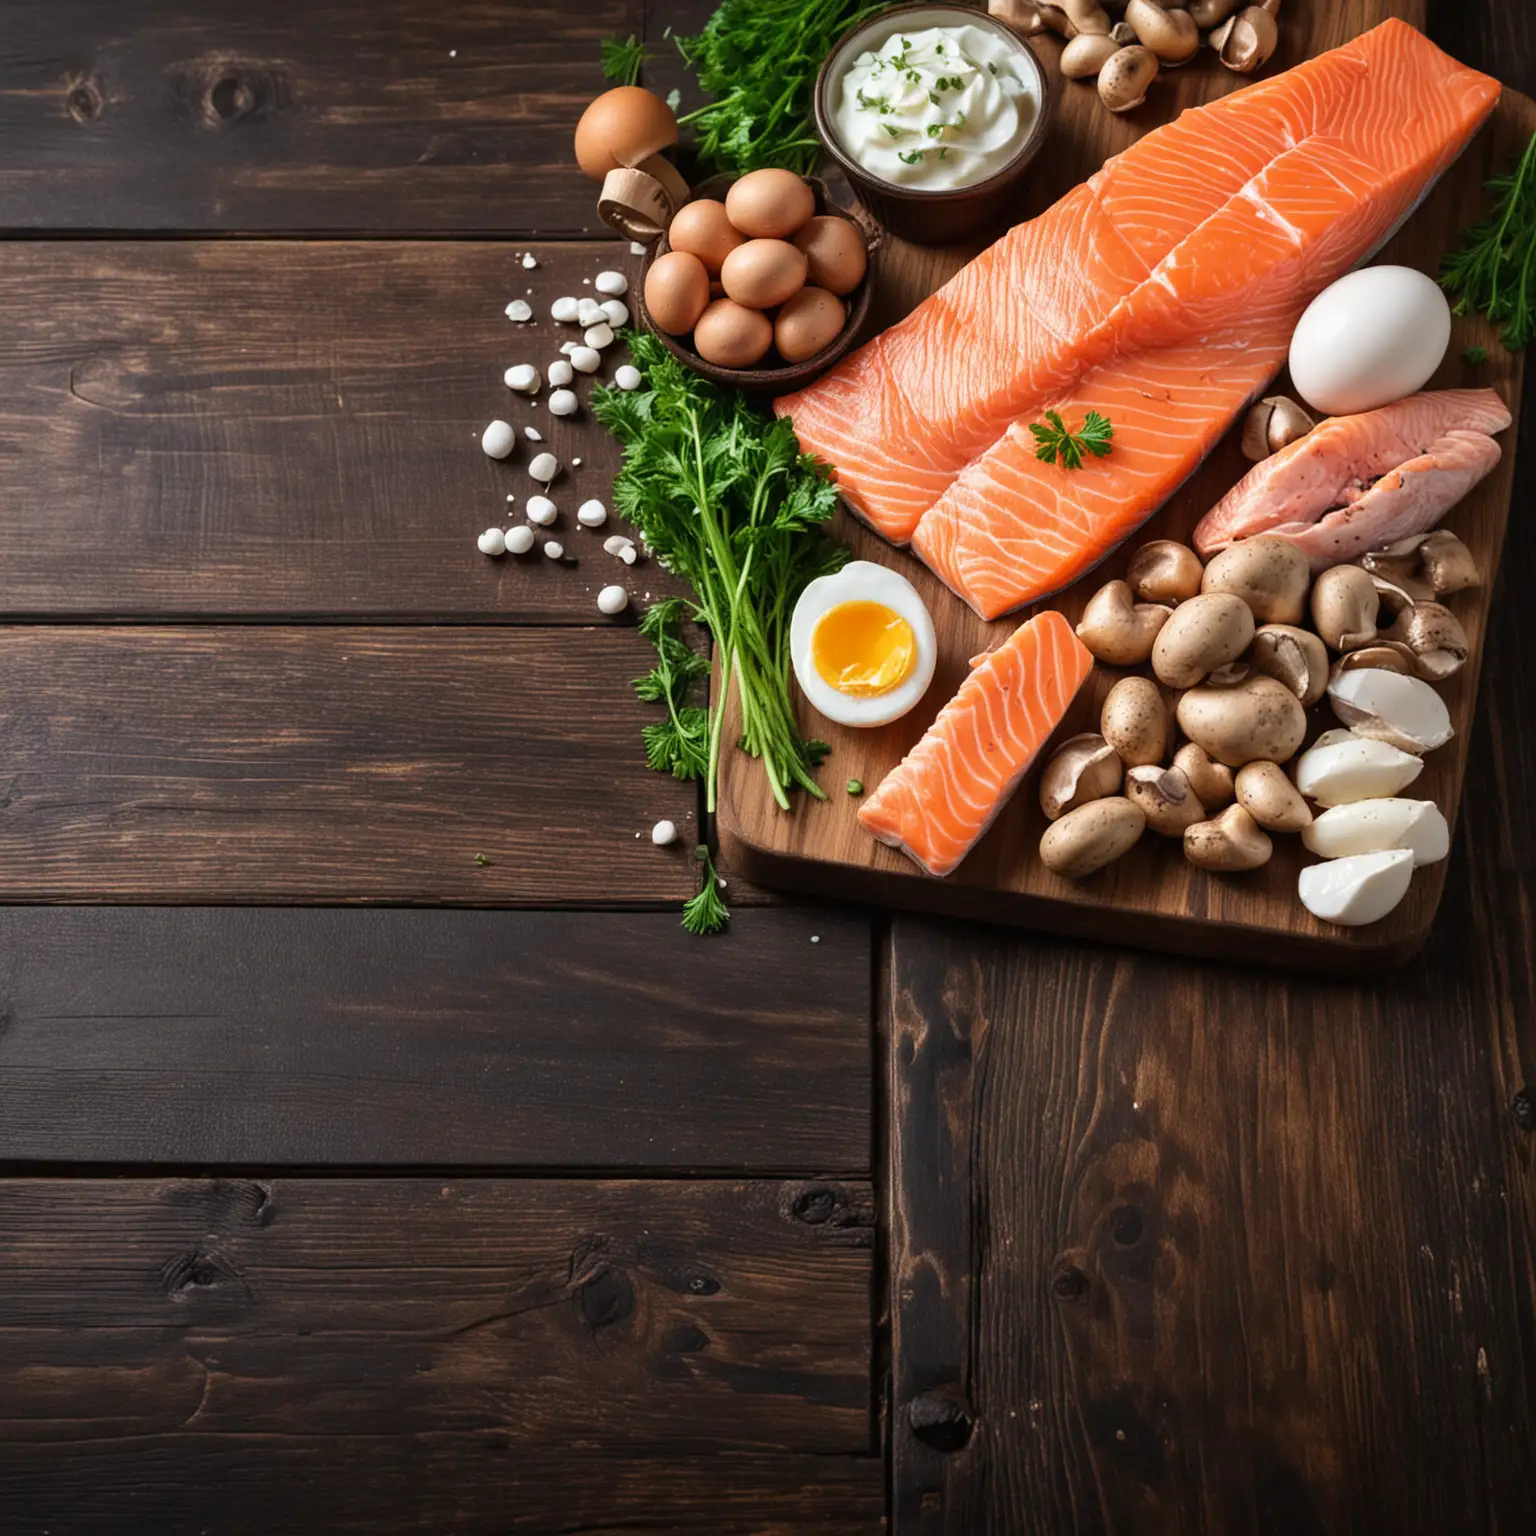 foods on a dark wooden table. Foods to include: dairy products, salmon, egg, mushrooms, parsley, fish oil capsules.